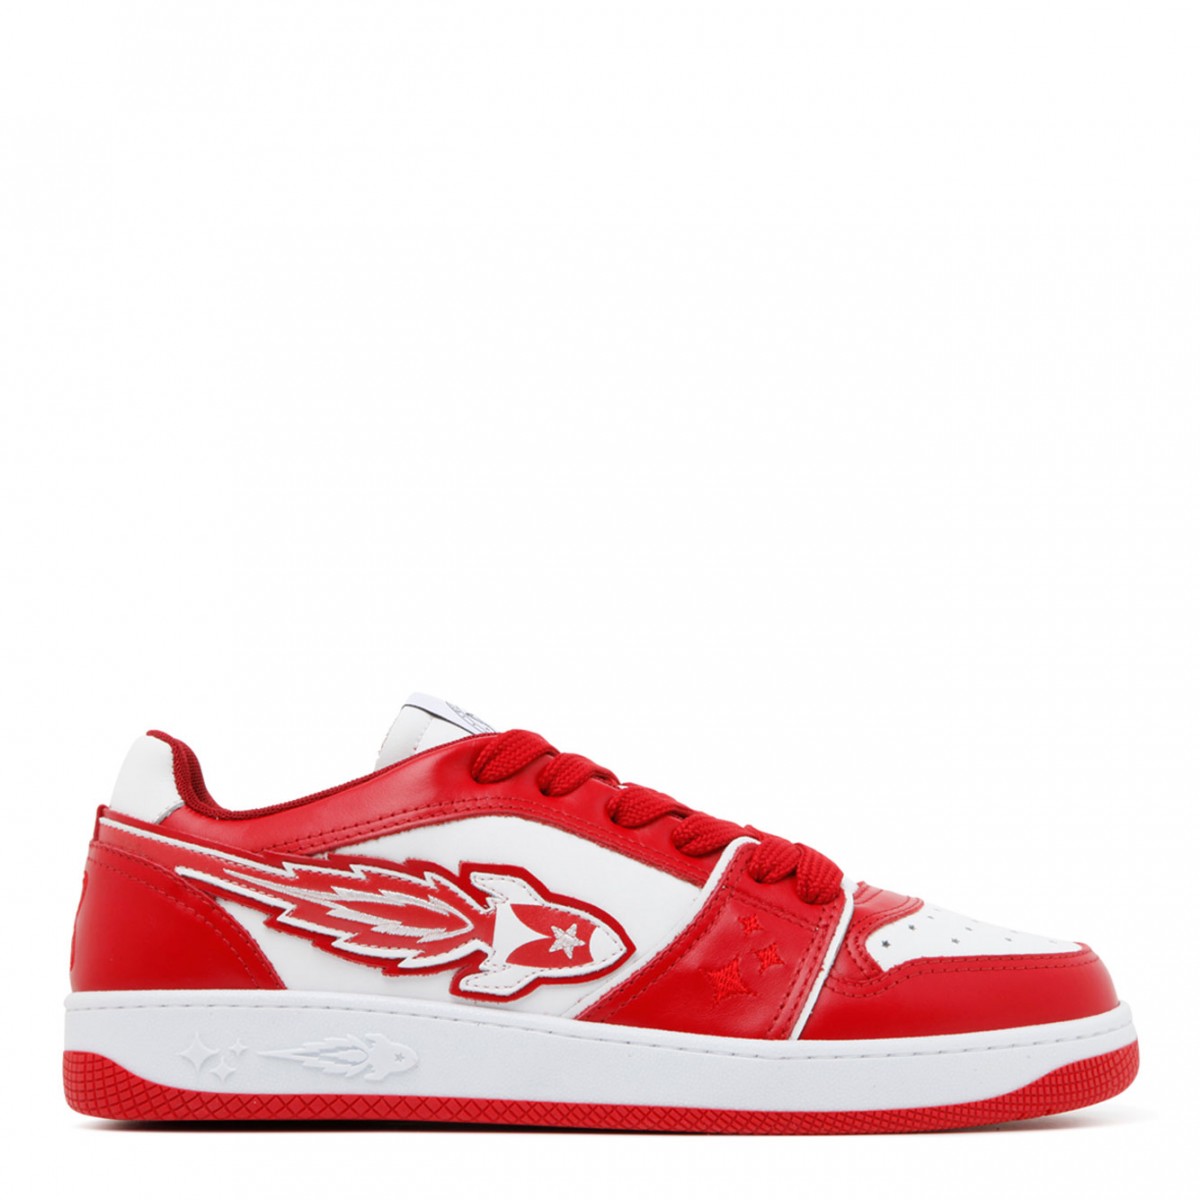 Enterprise Japan Red and White Leather Rocket M Panelled Lace Up Sneakers. 